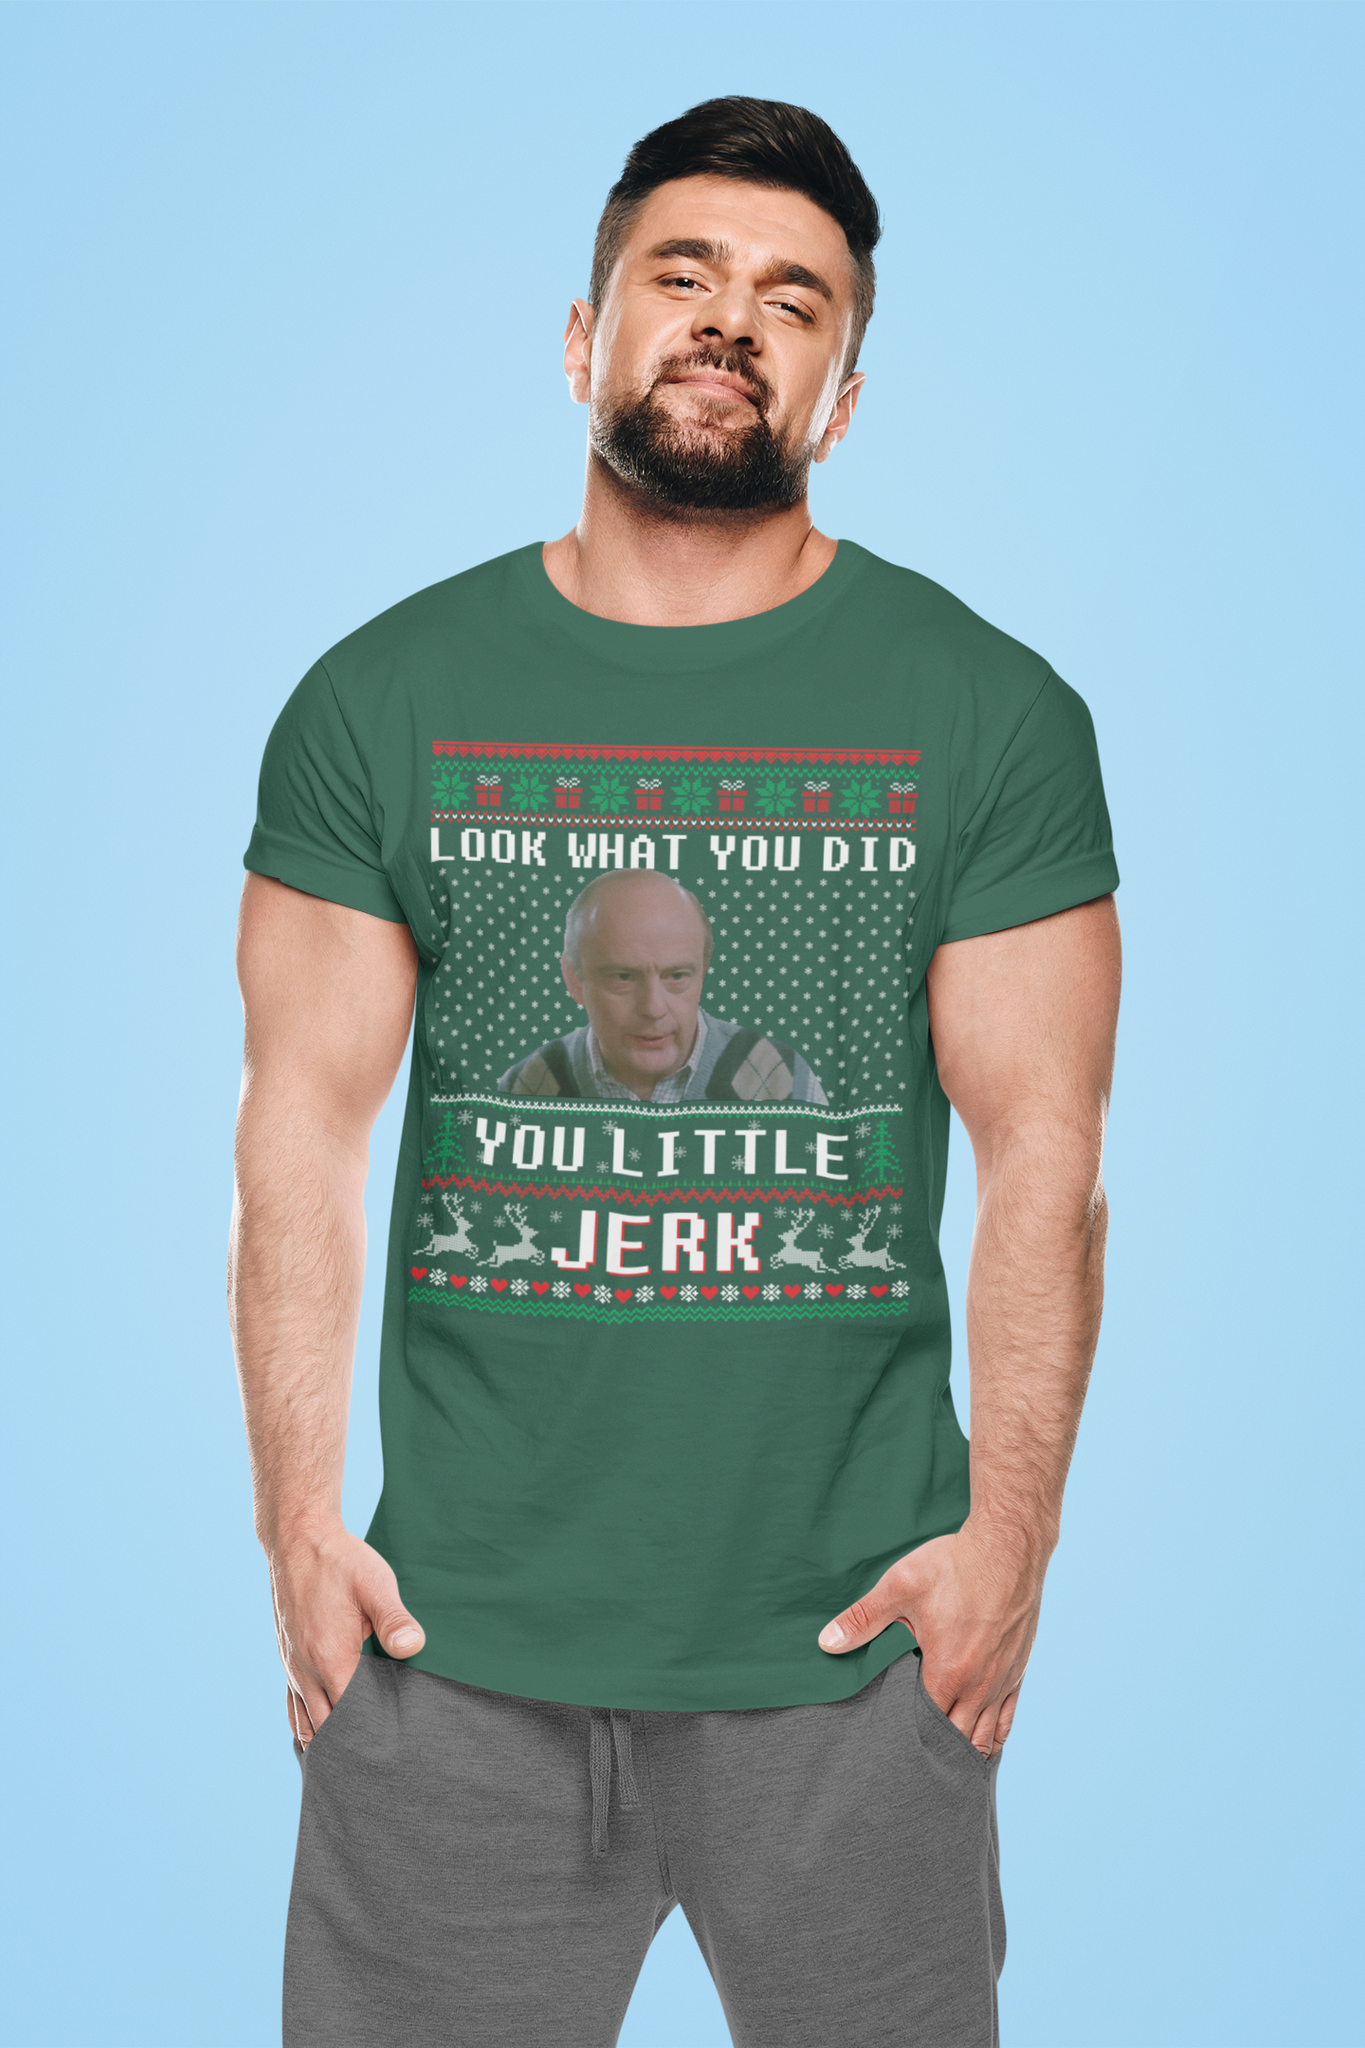 Home Alone Ugly Sweater Shirt, Look What You Did You Little Jerk Tshirt, Frank McCallister T Shirt, Christmas Gifts